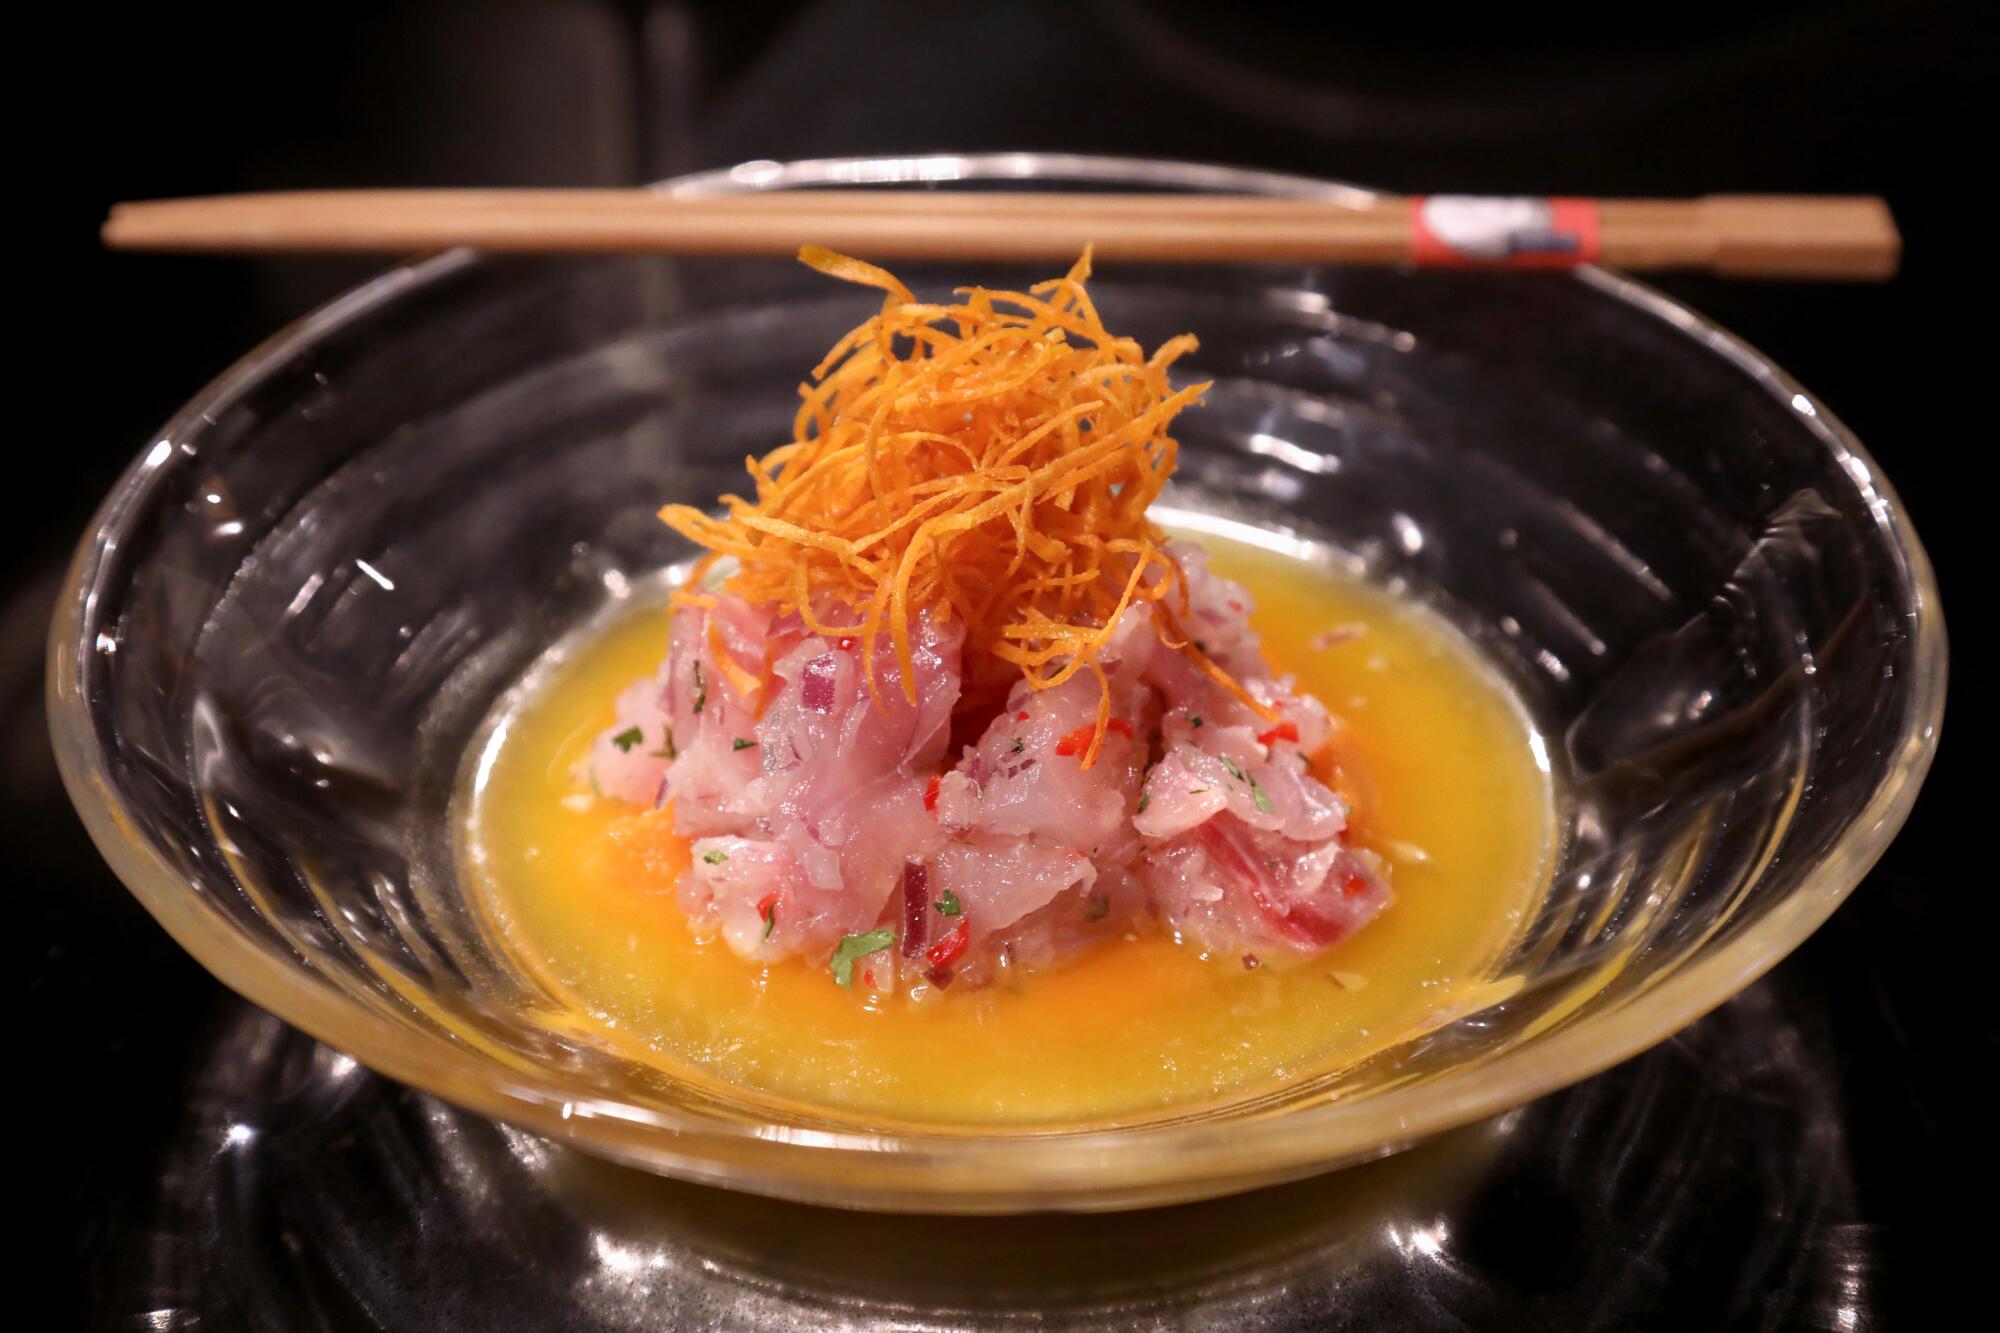 Peruvian ceviche, stacked, rested in orange sauce in a glass bowl